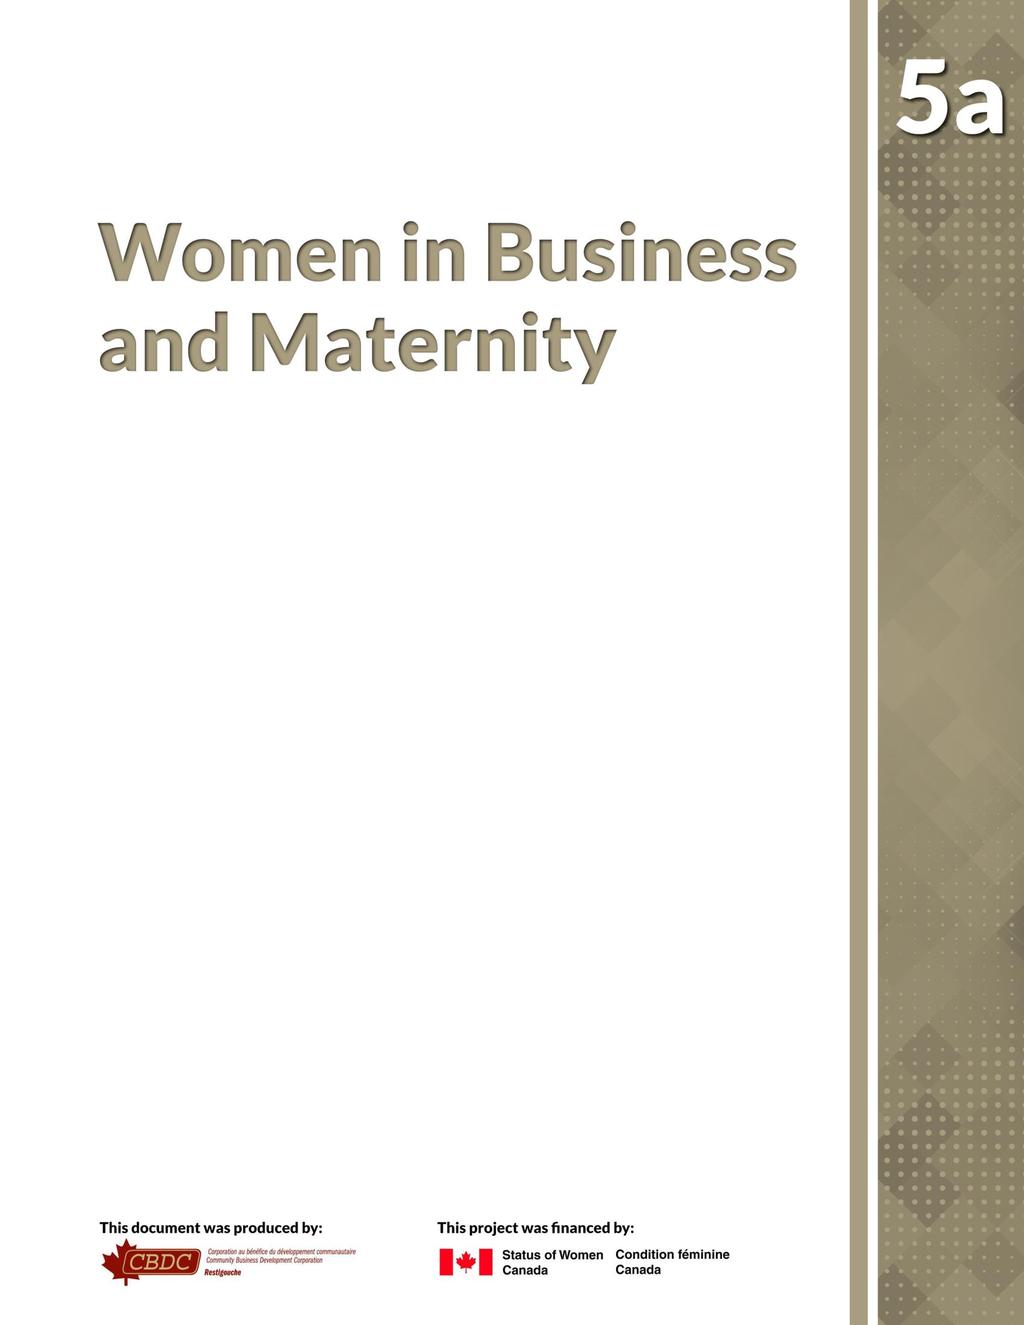 This document has been developed for loan agents whose female business clients are considering having children and have questions regarding their options as entrepreneurs.